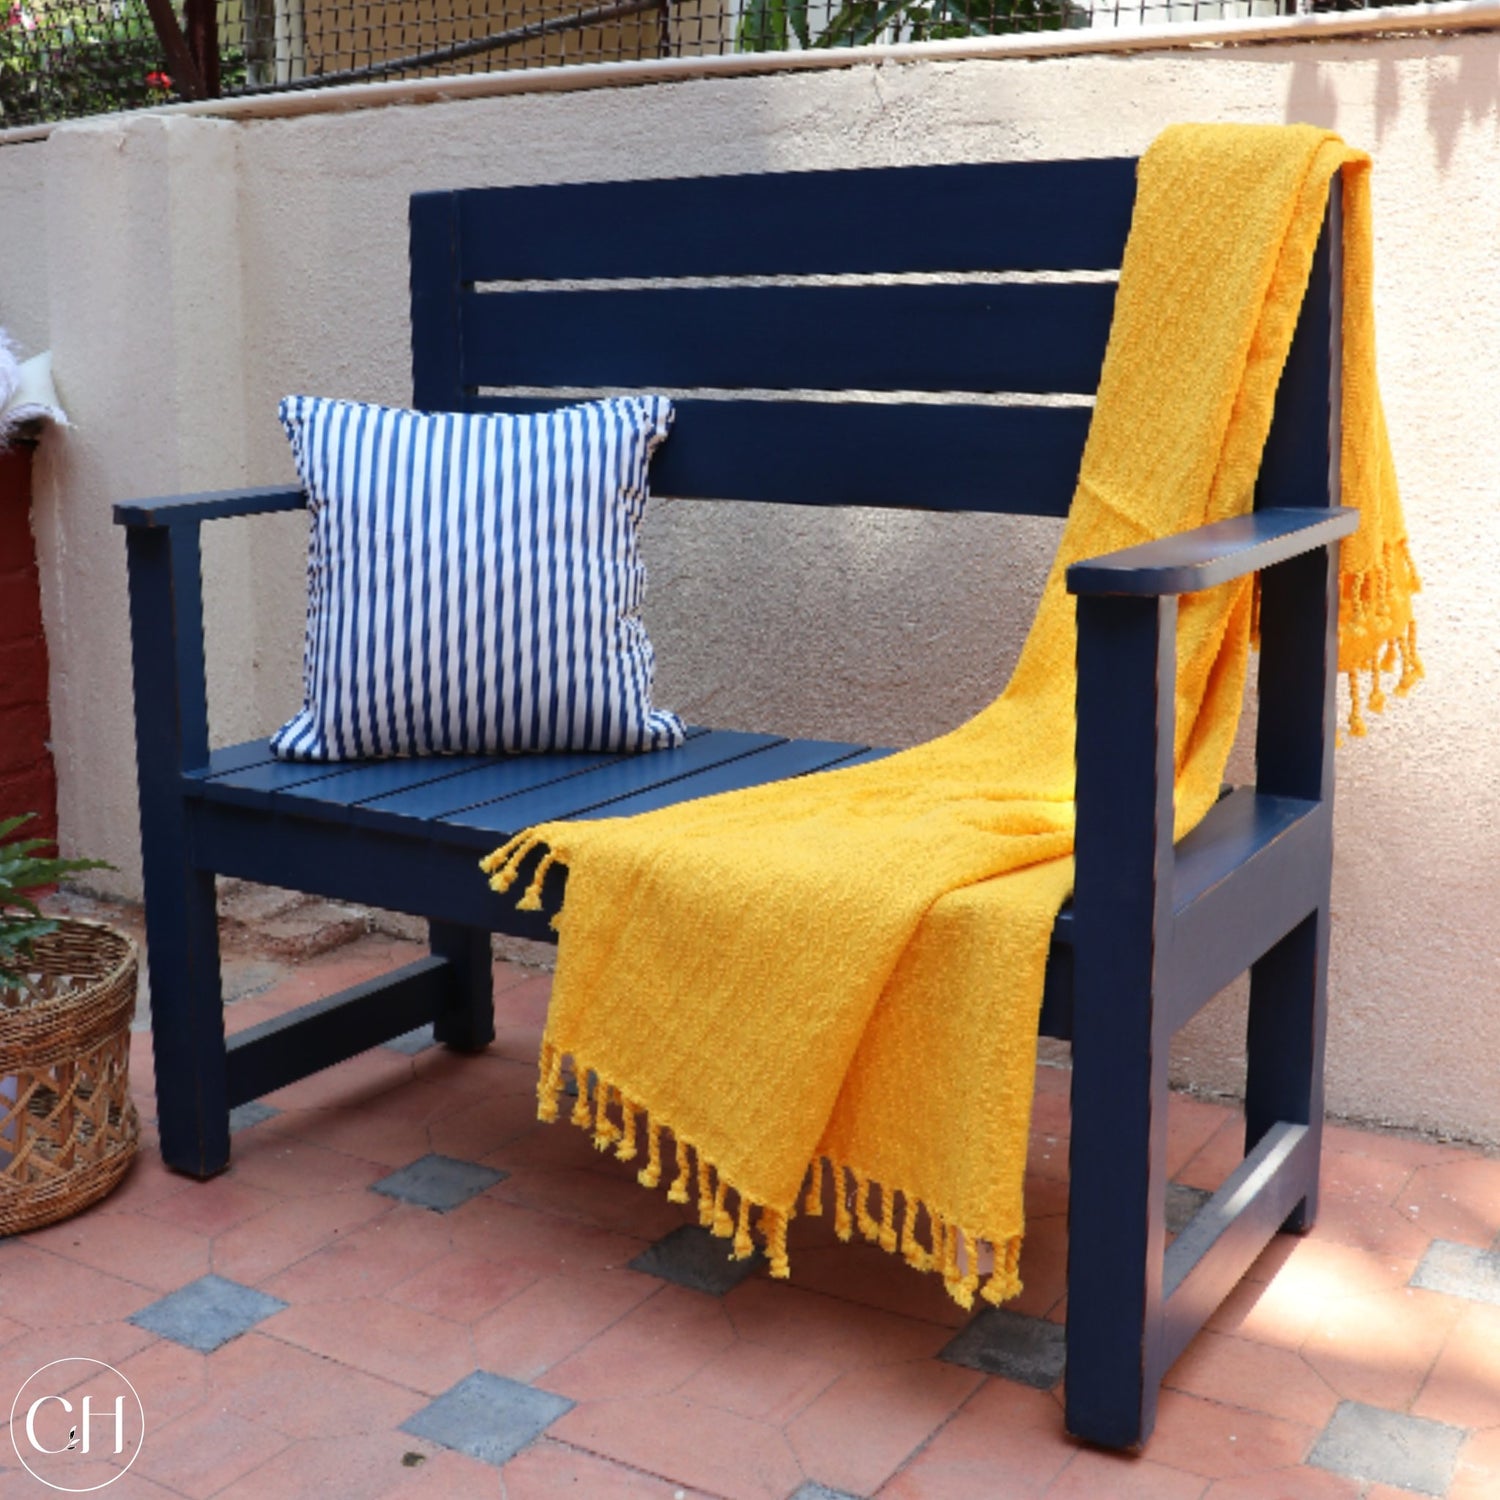 CustHum Blue outdoor bench, styled with yellow throw and blue striped cushion